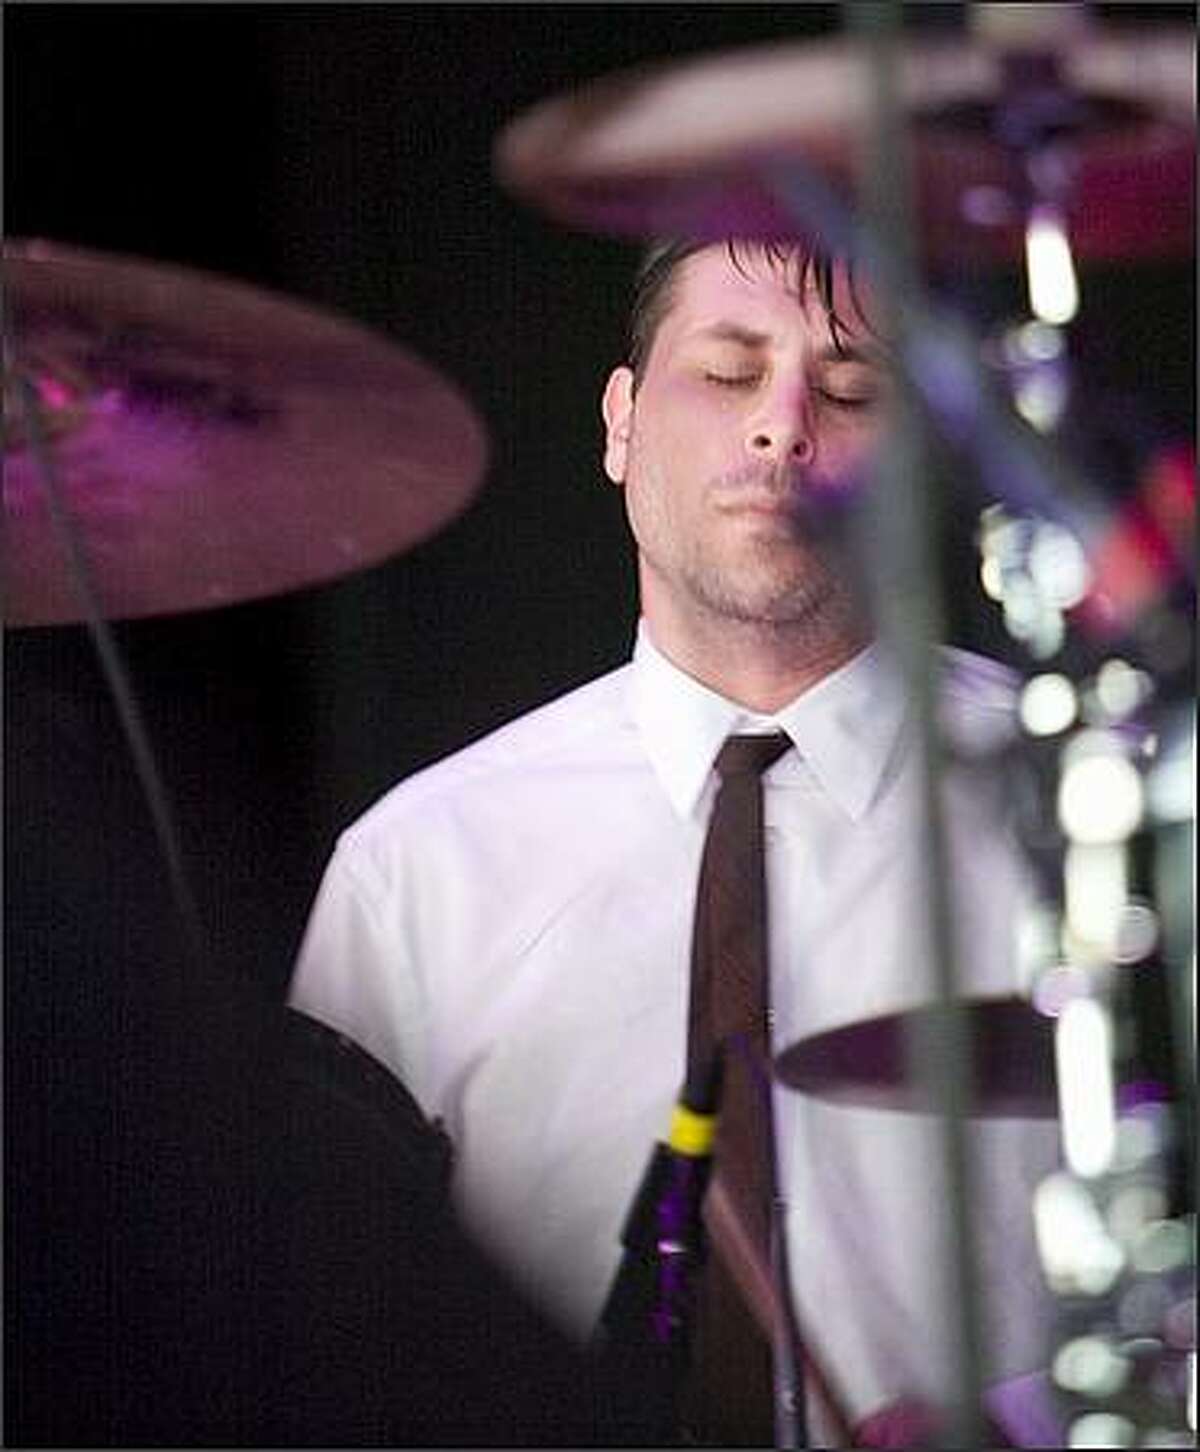 The Liars drummer Julian Gross feels the beat as they were the opening act for Radiohead at White River Amphitheatre.